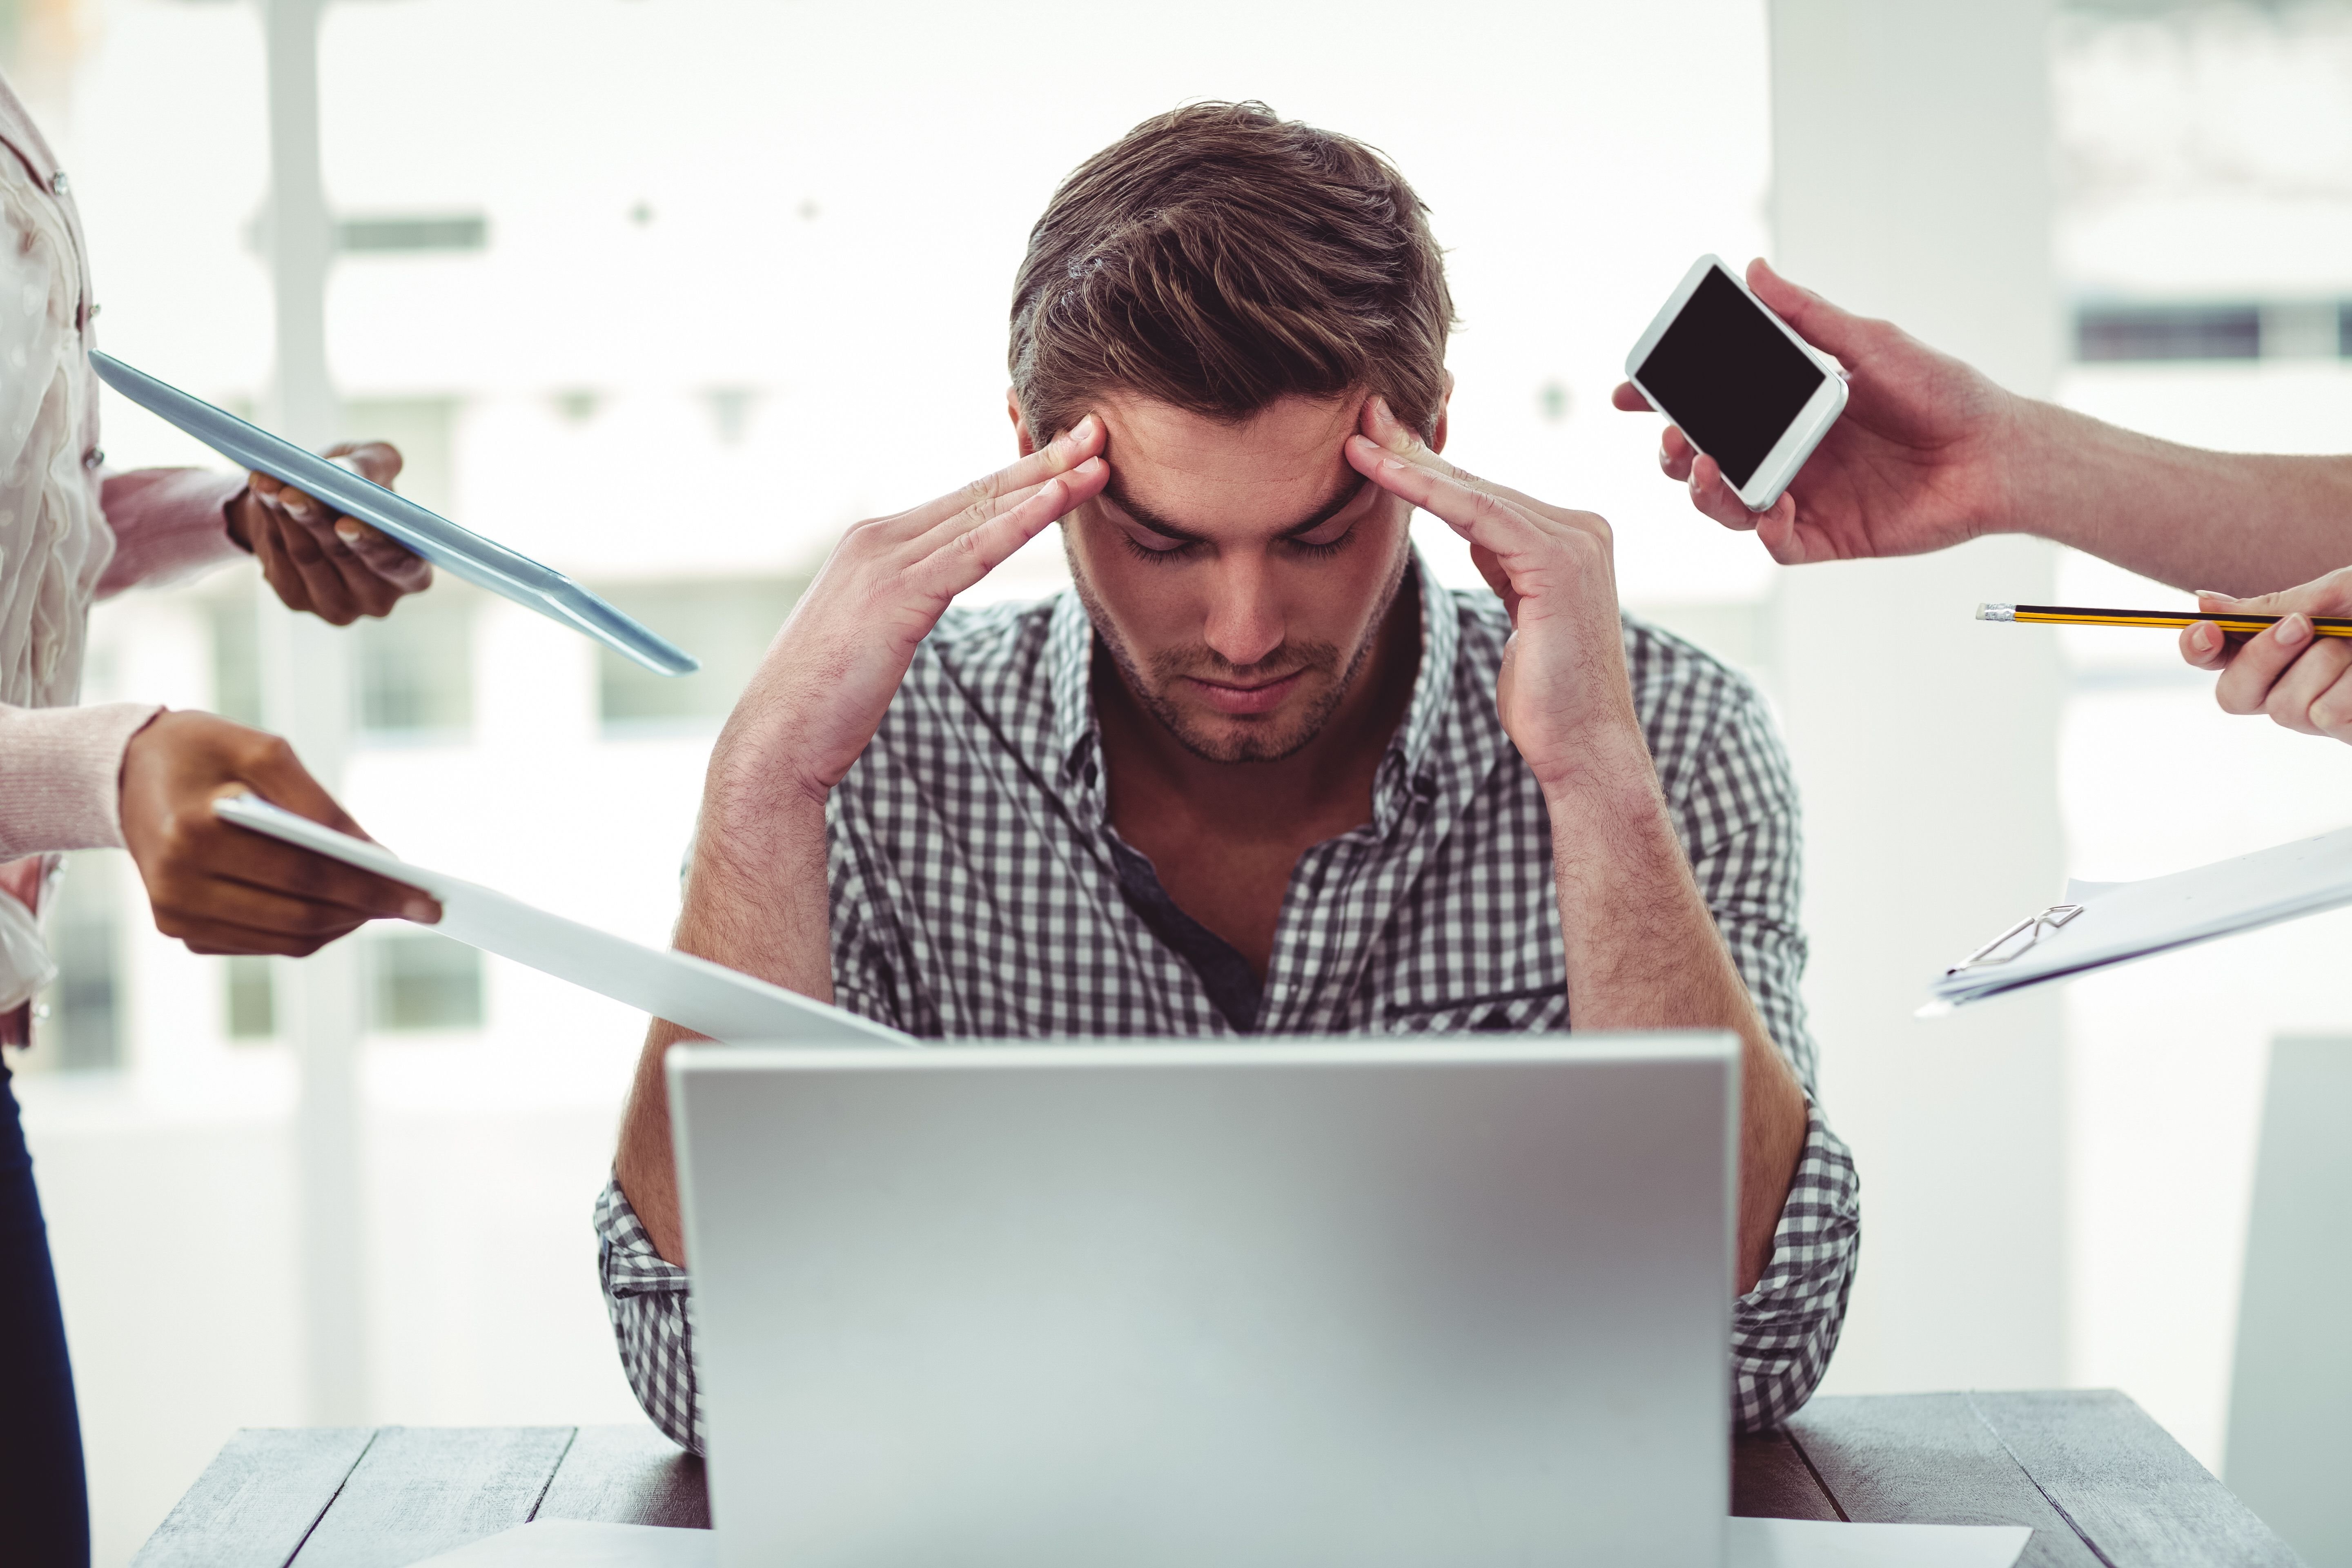 A man looking stressed while working on his laptop. | Source: Shutterstock